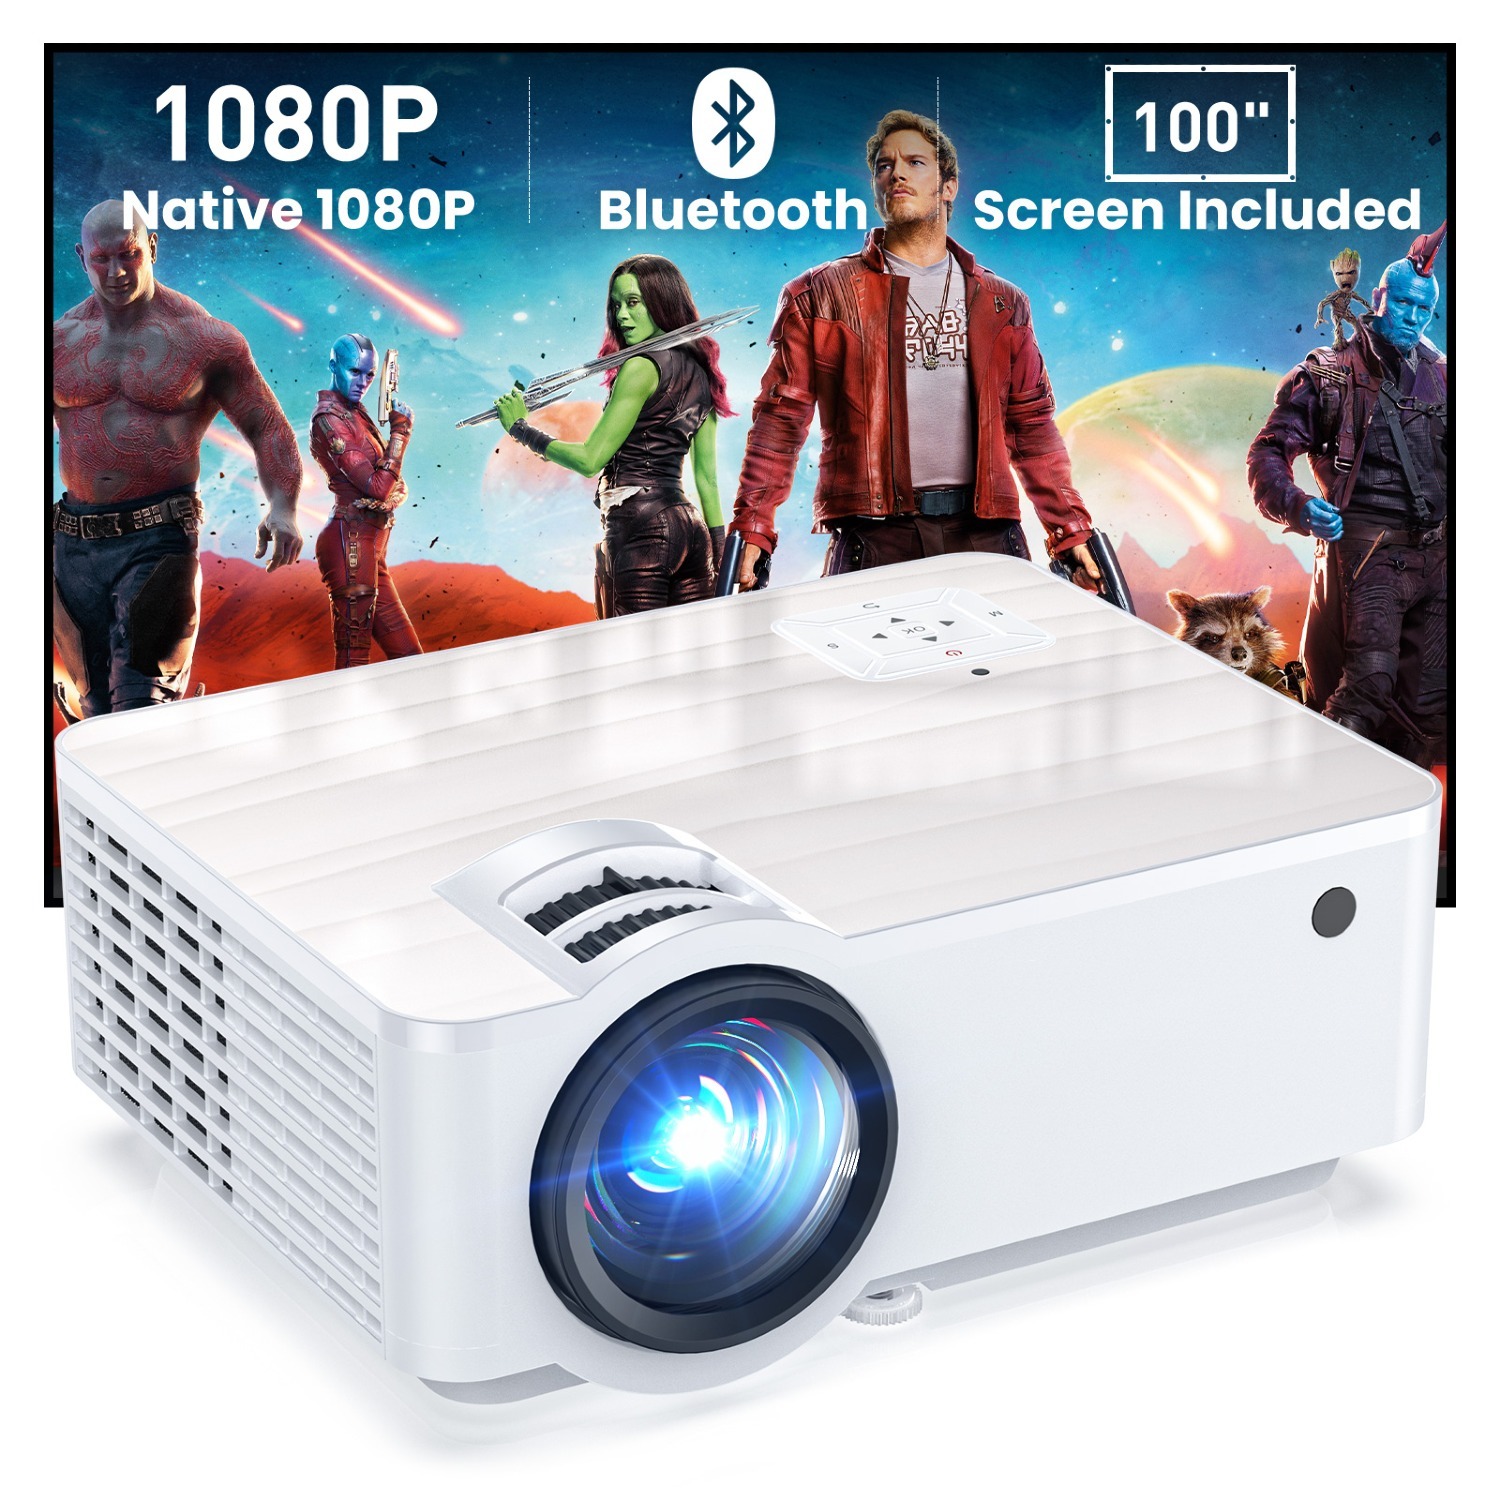 GROVIEW 1080P Bluetooth Projector w/100" Screen $59.99 +Free Shipping